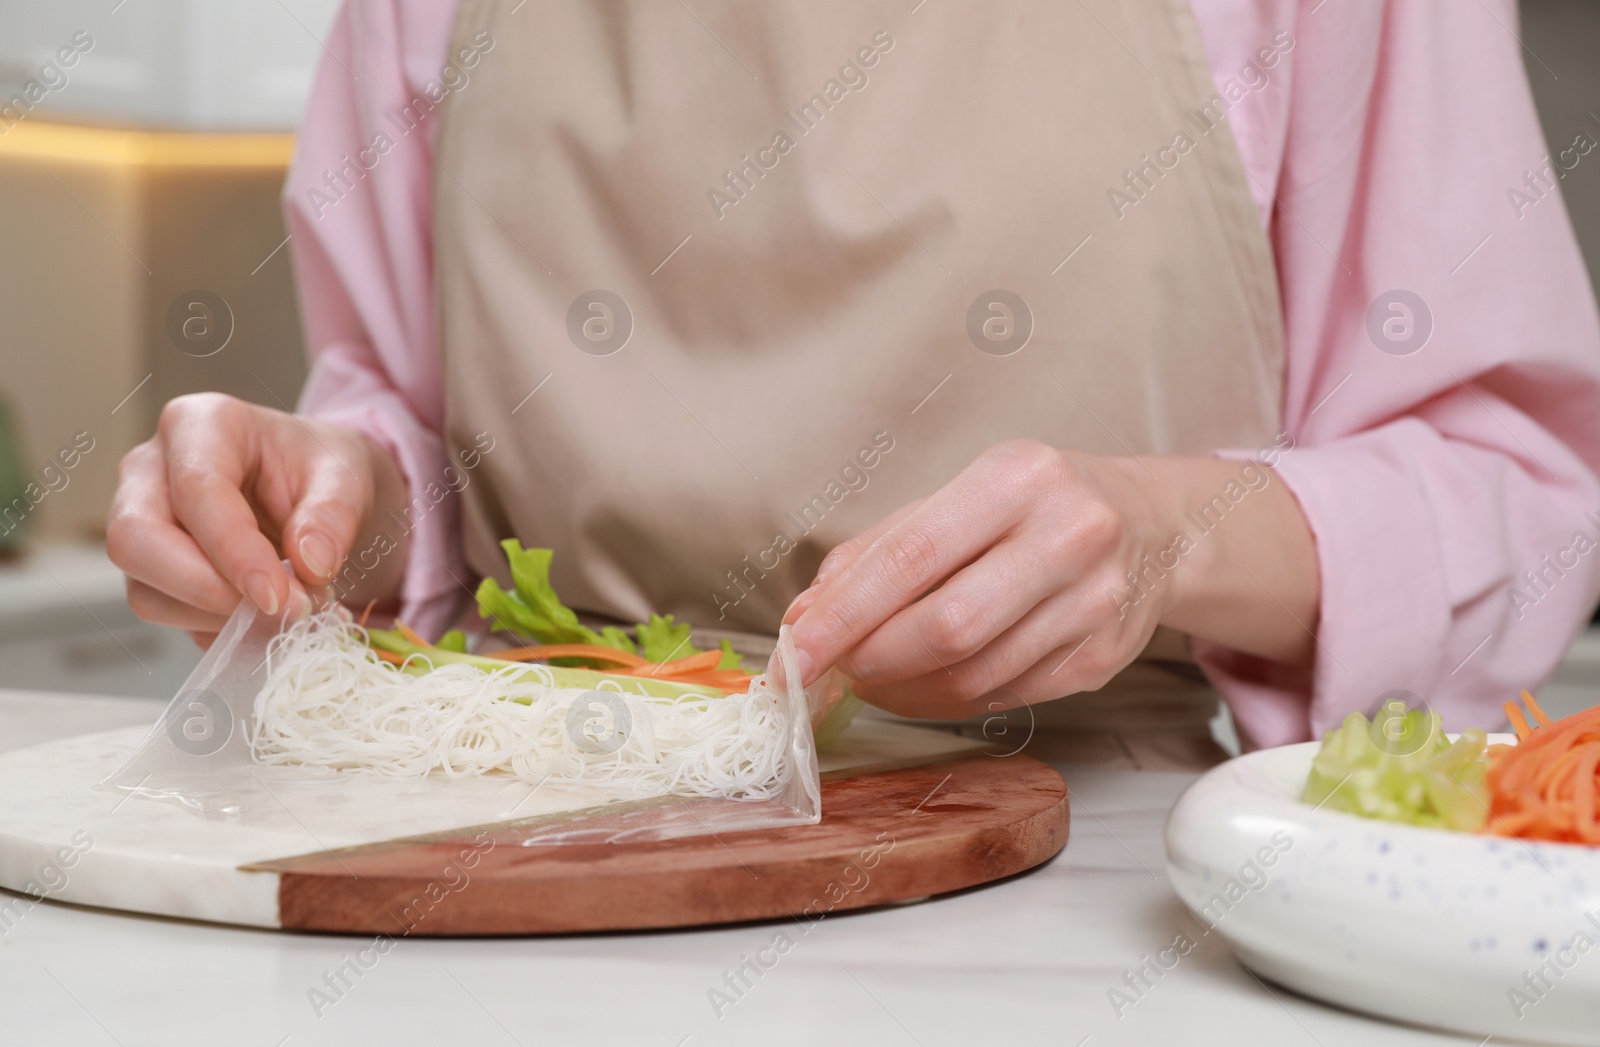 Photo of Making delicious spring rolls. Woman wrapping ingredients into rice paper at white table, closeup